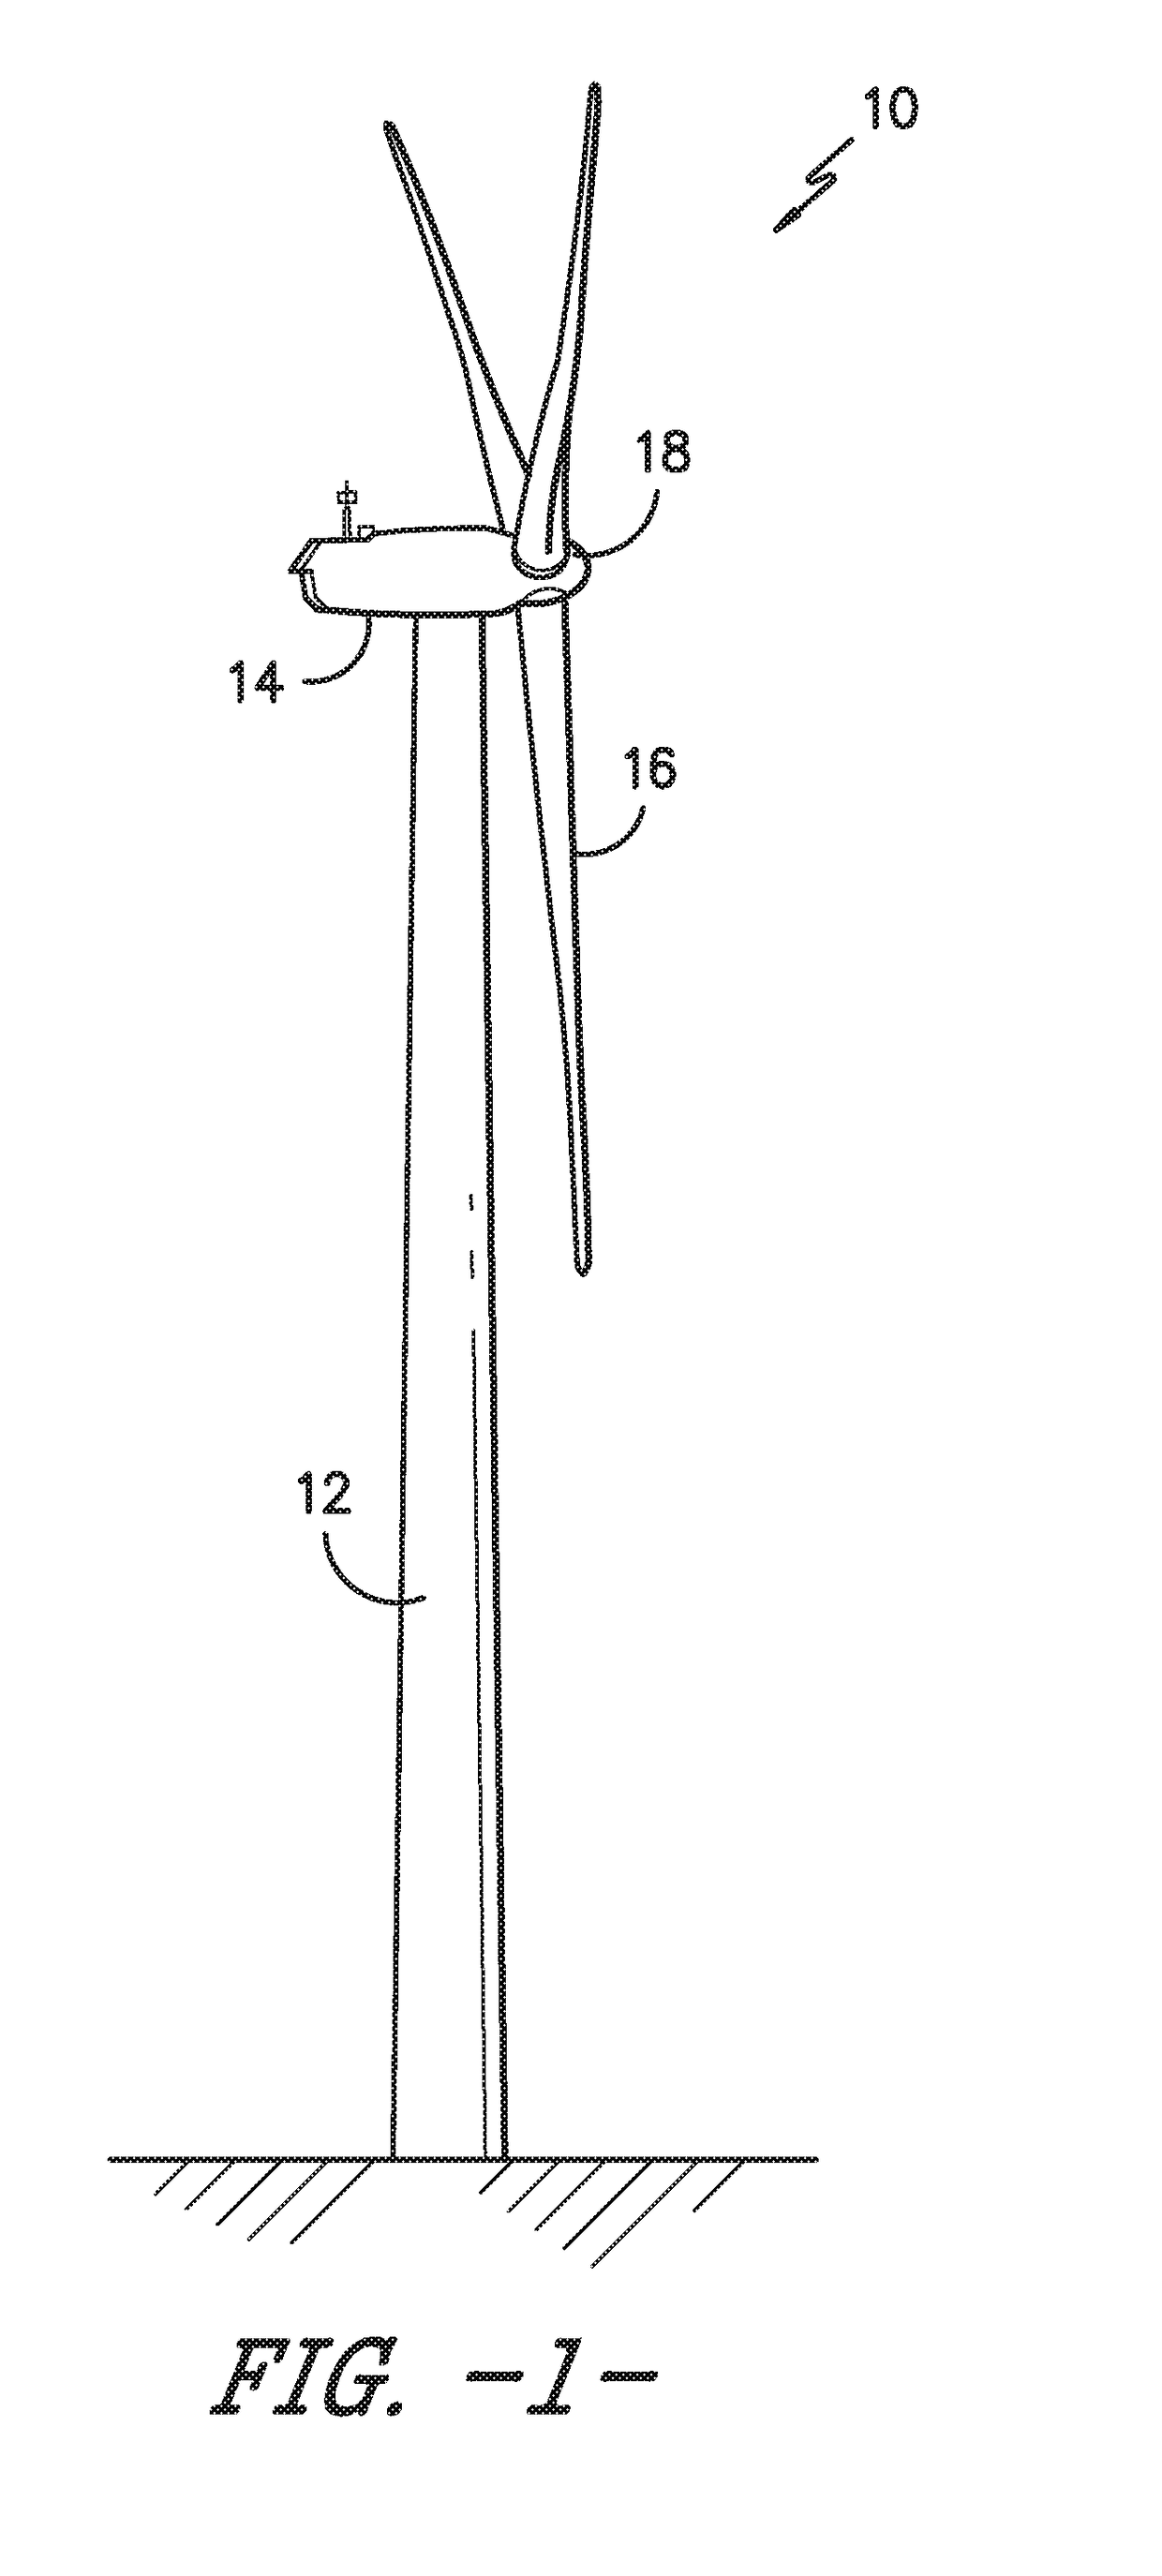 Tip Extensions for Wind Turbine Rotor Blades and Methods of Installing Same